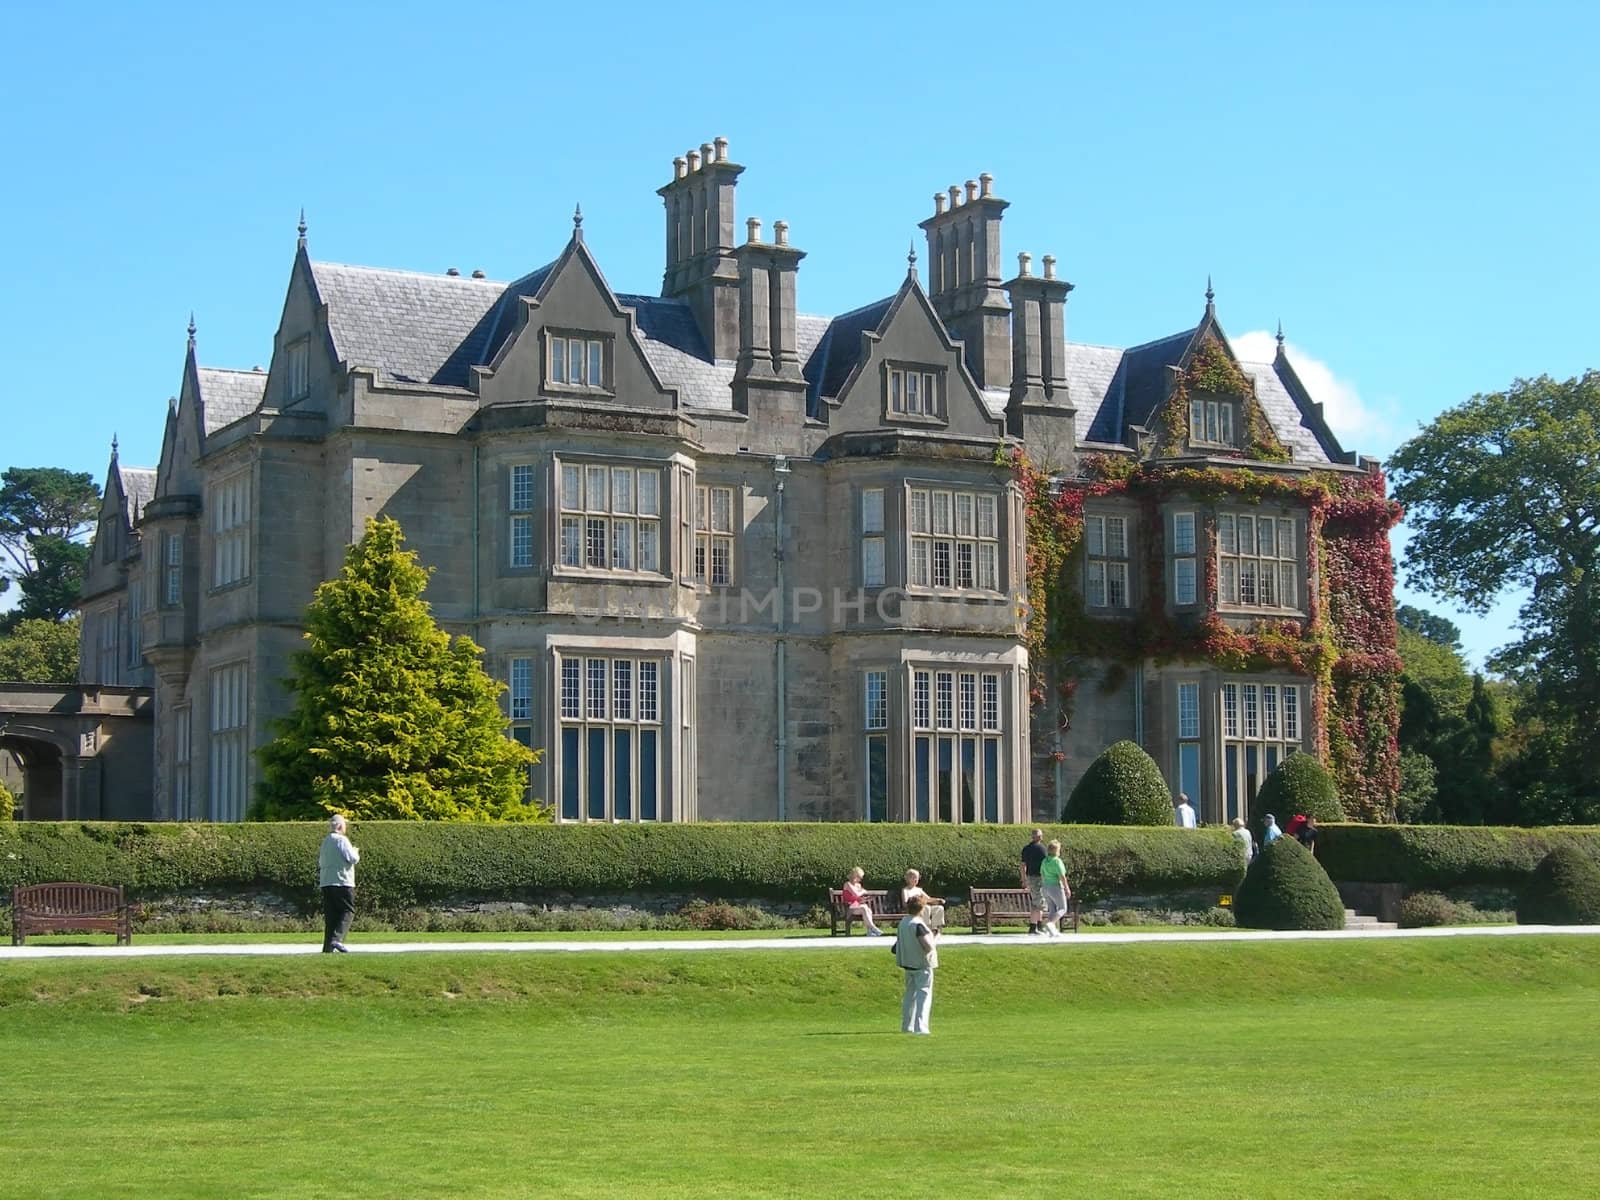 Muckross House, Victorian mansion, in Killarney, County Kerry, Ireland. Building commenced in 1839 and was completed in 1843. It is amongst one of the most visited tourist attractions in Ireland.